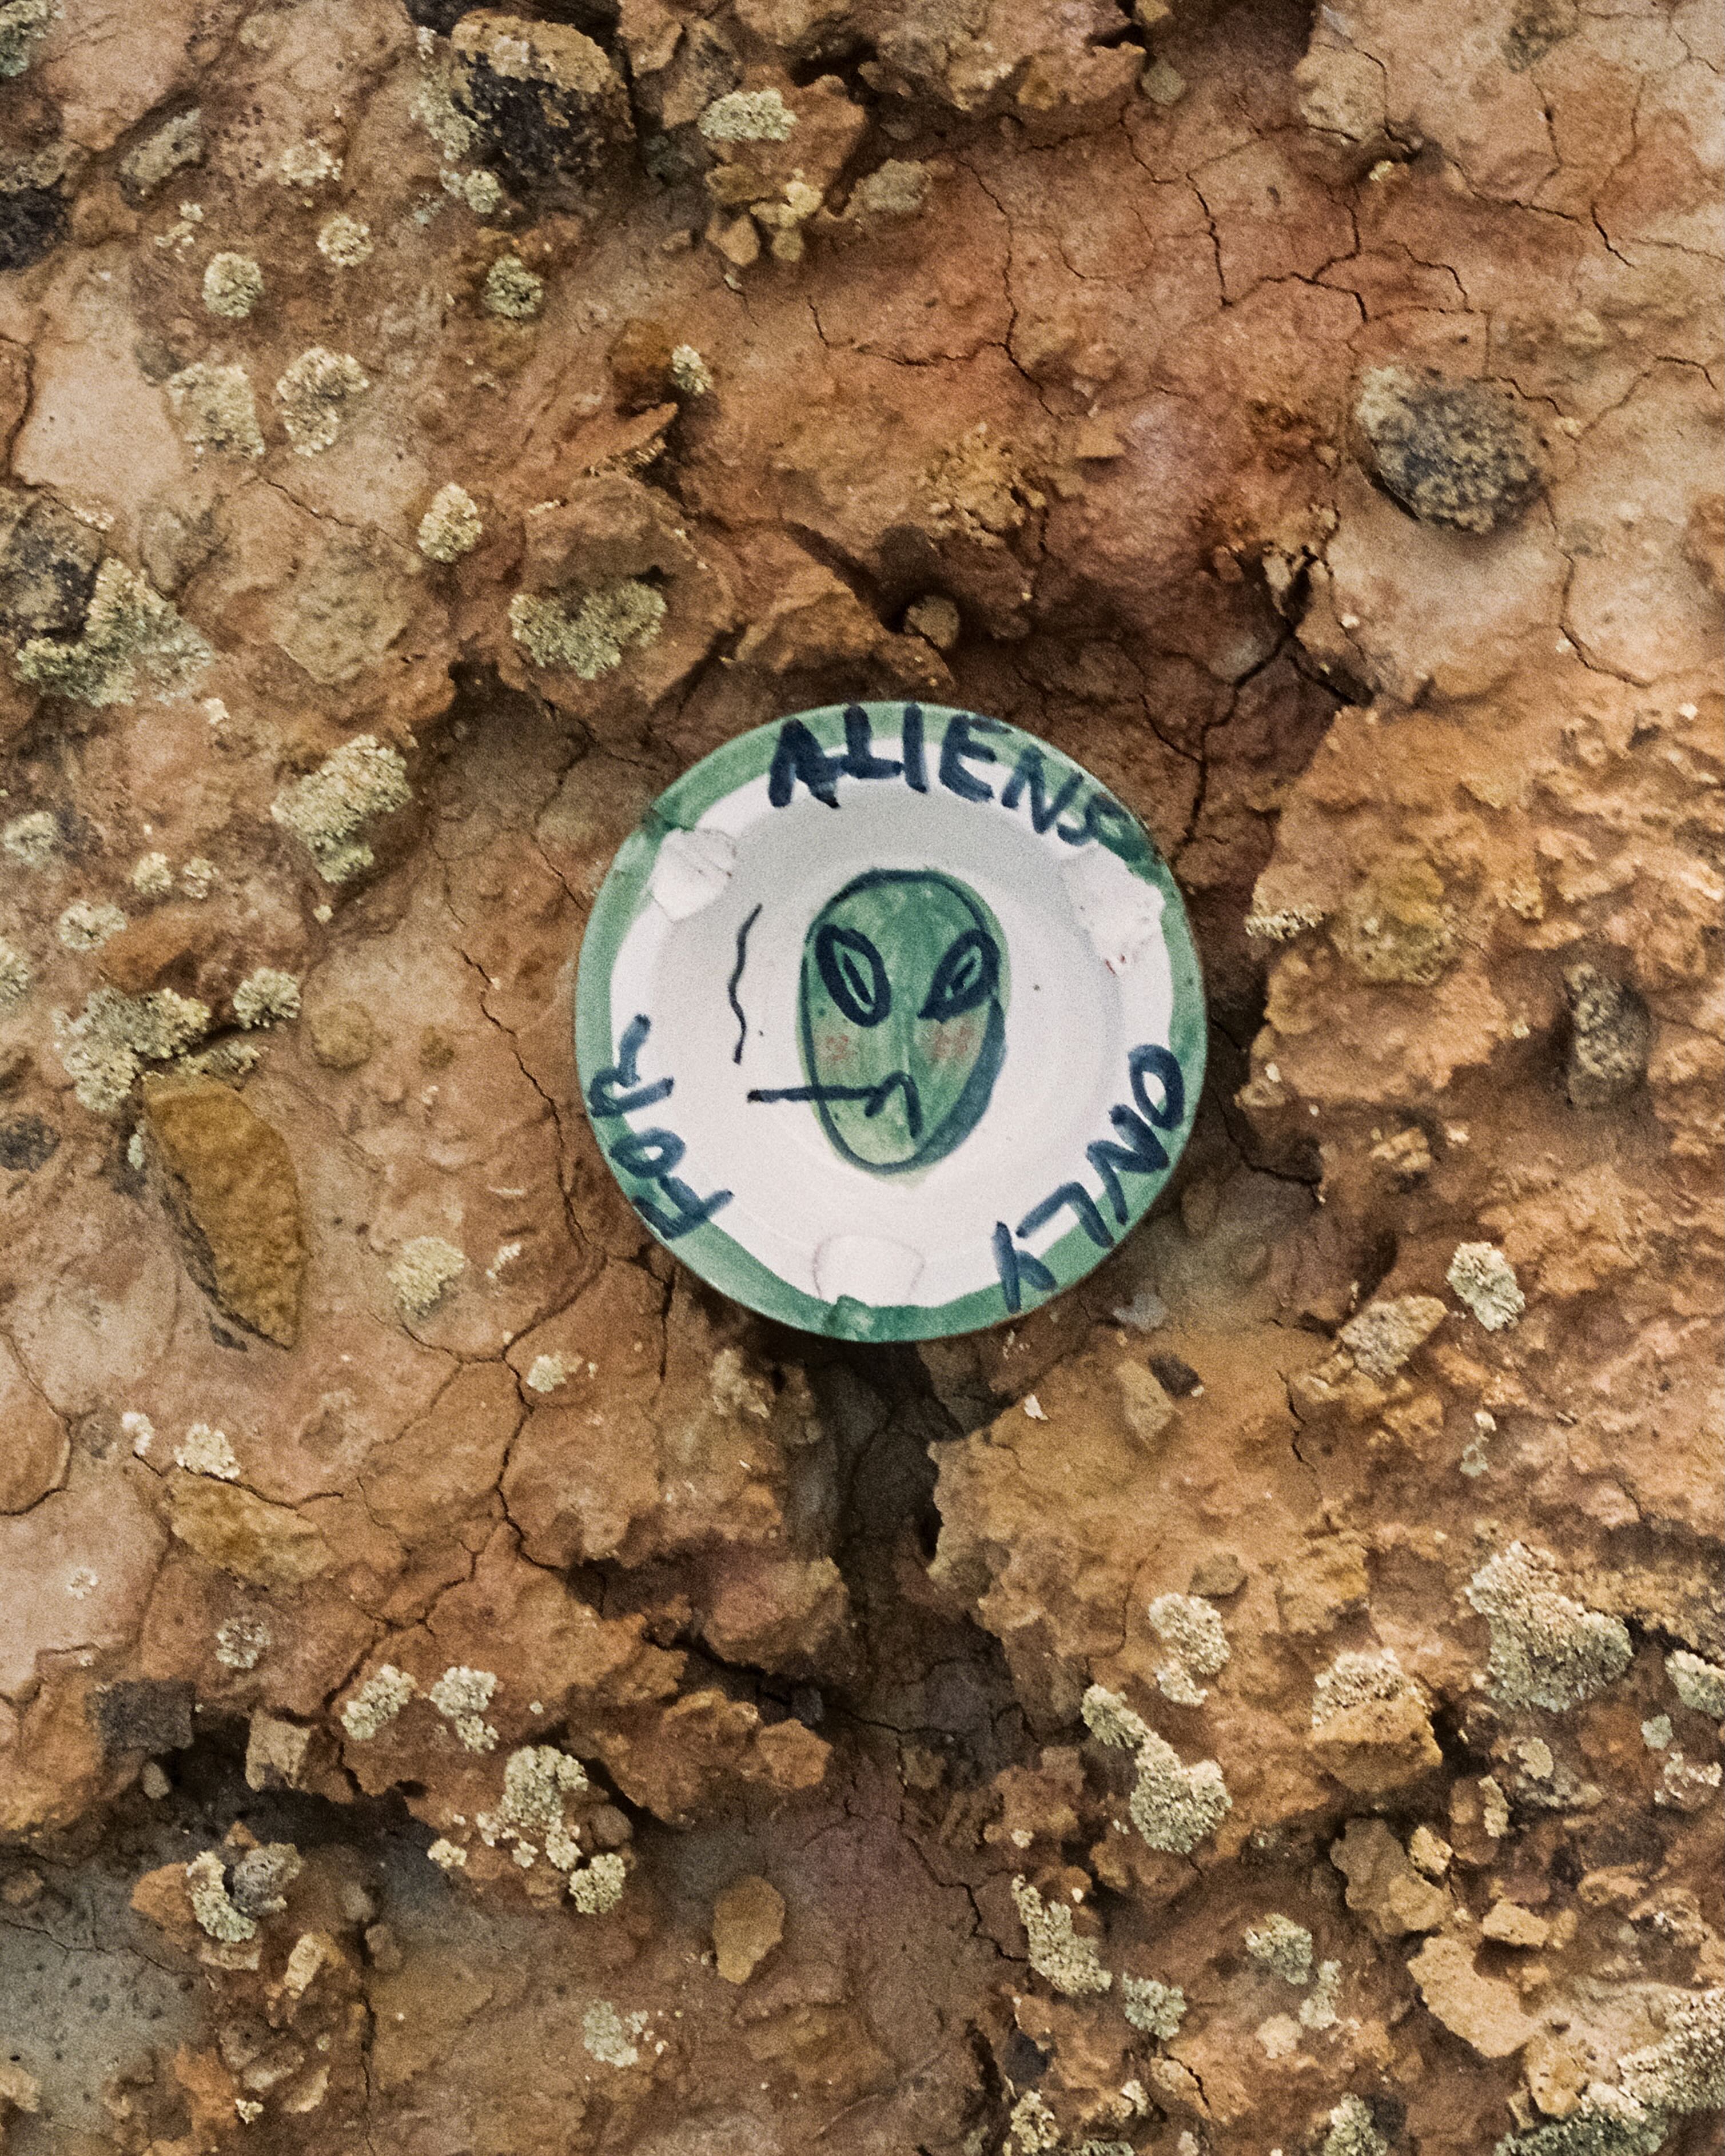 "For aliens only" ashtray